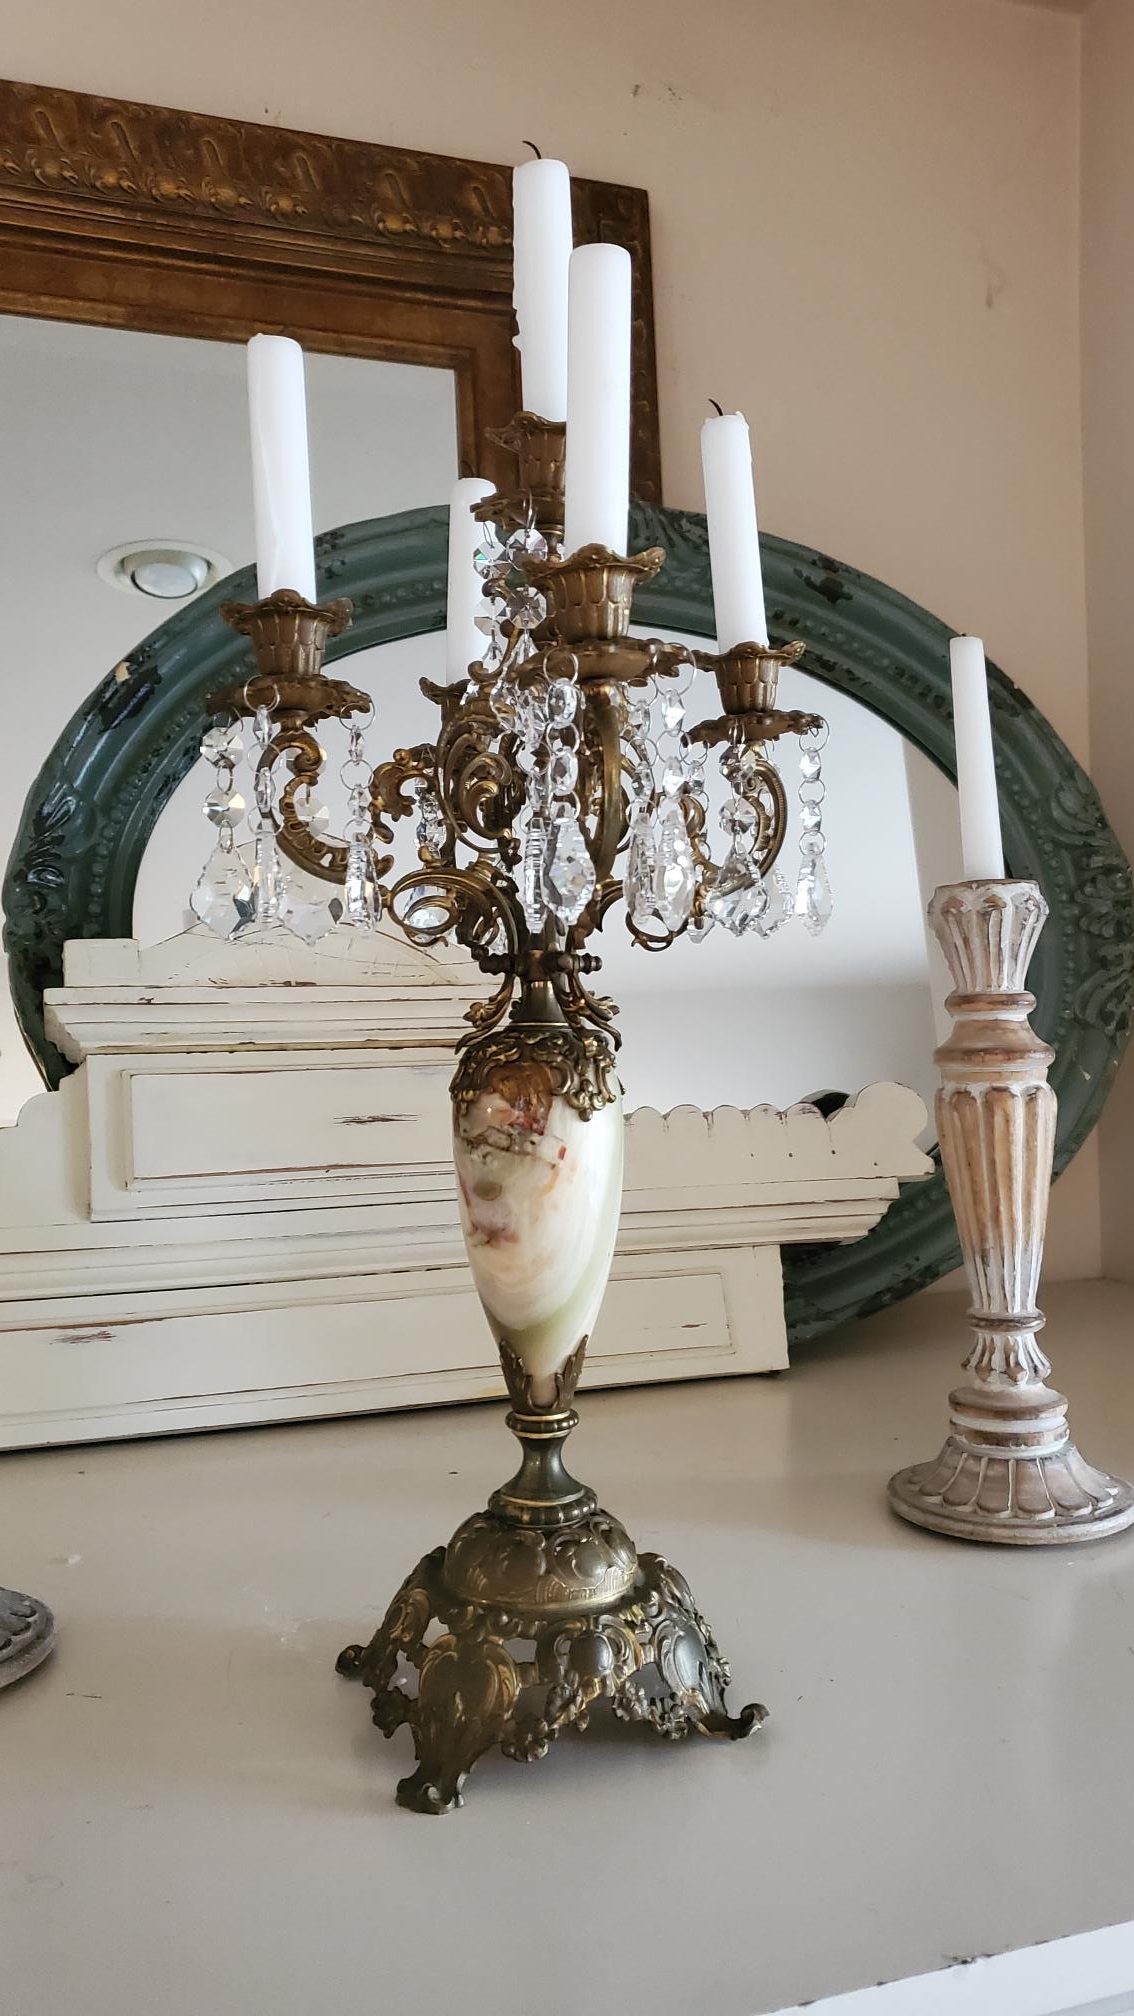 Antique brass candelabra on our fireplace mantle. Decorating with vintage style.